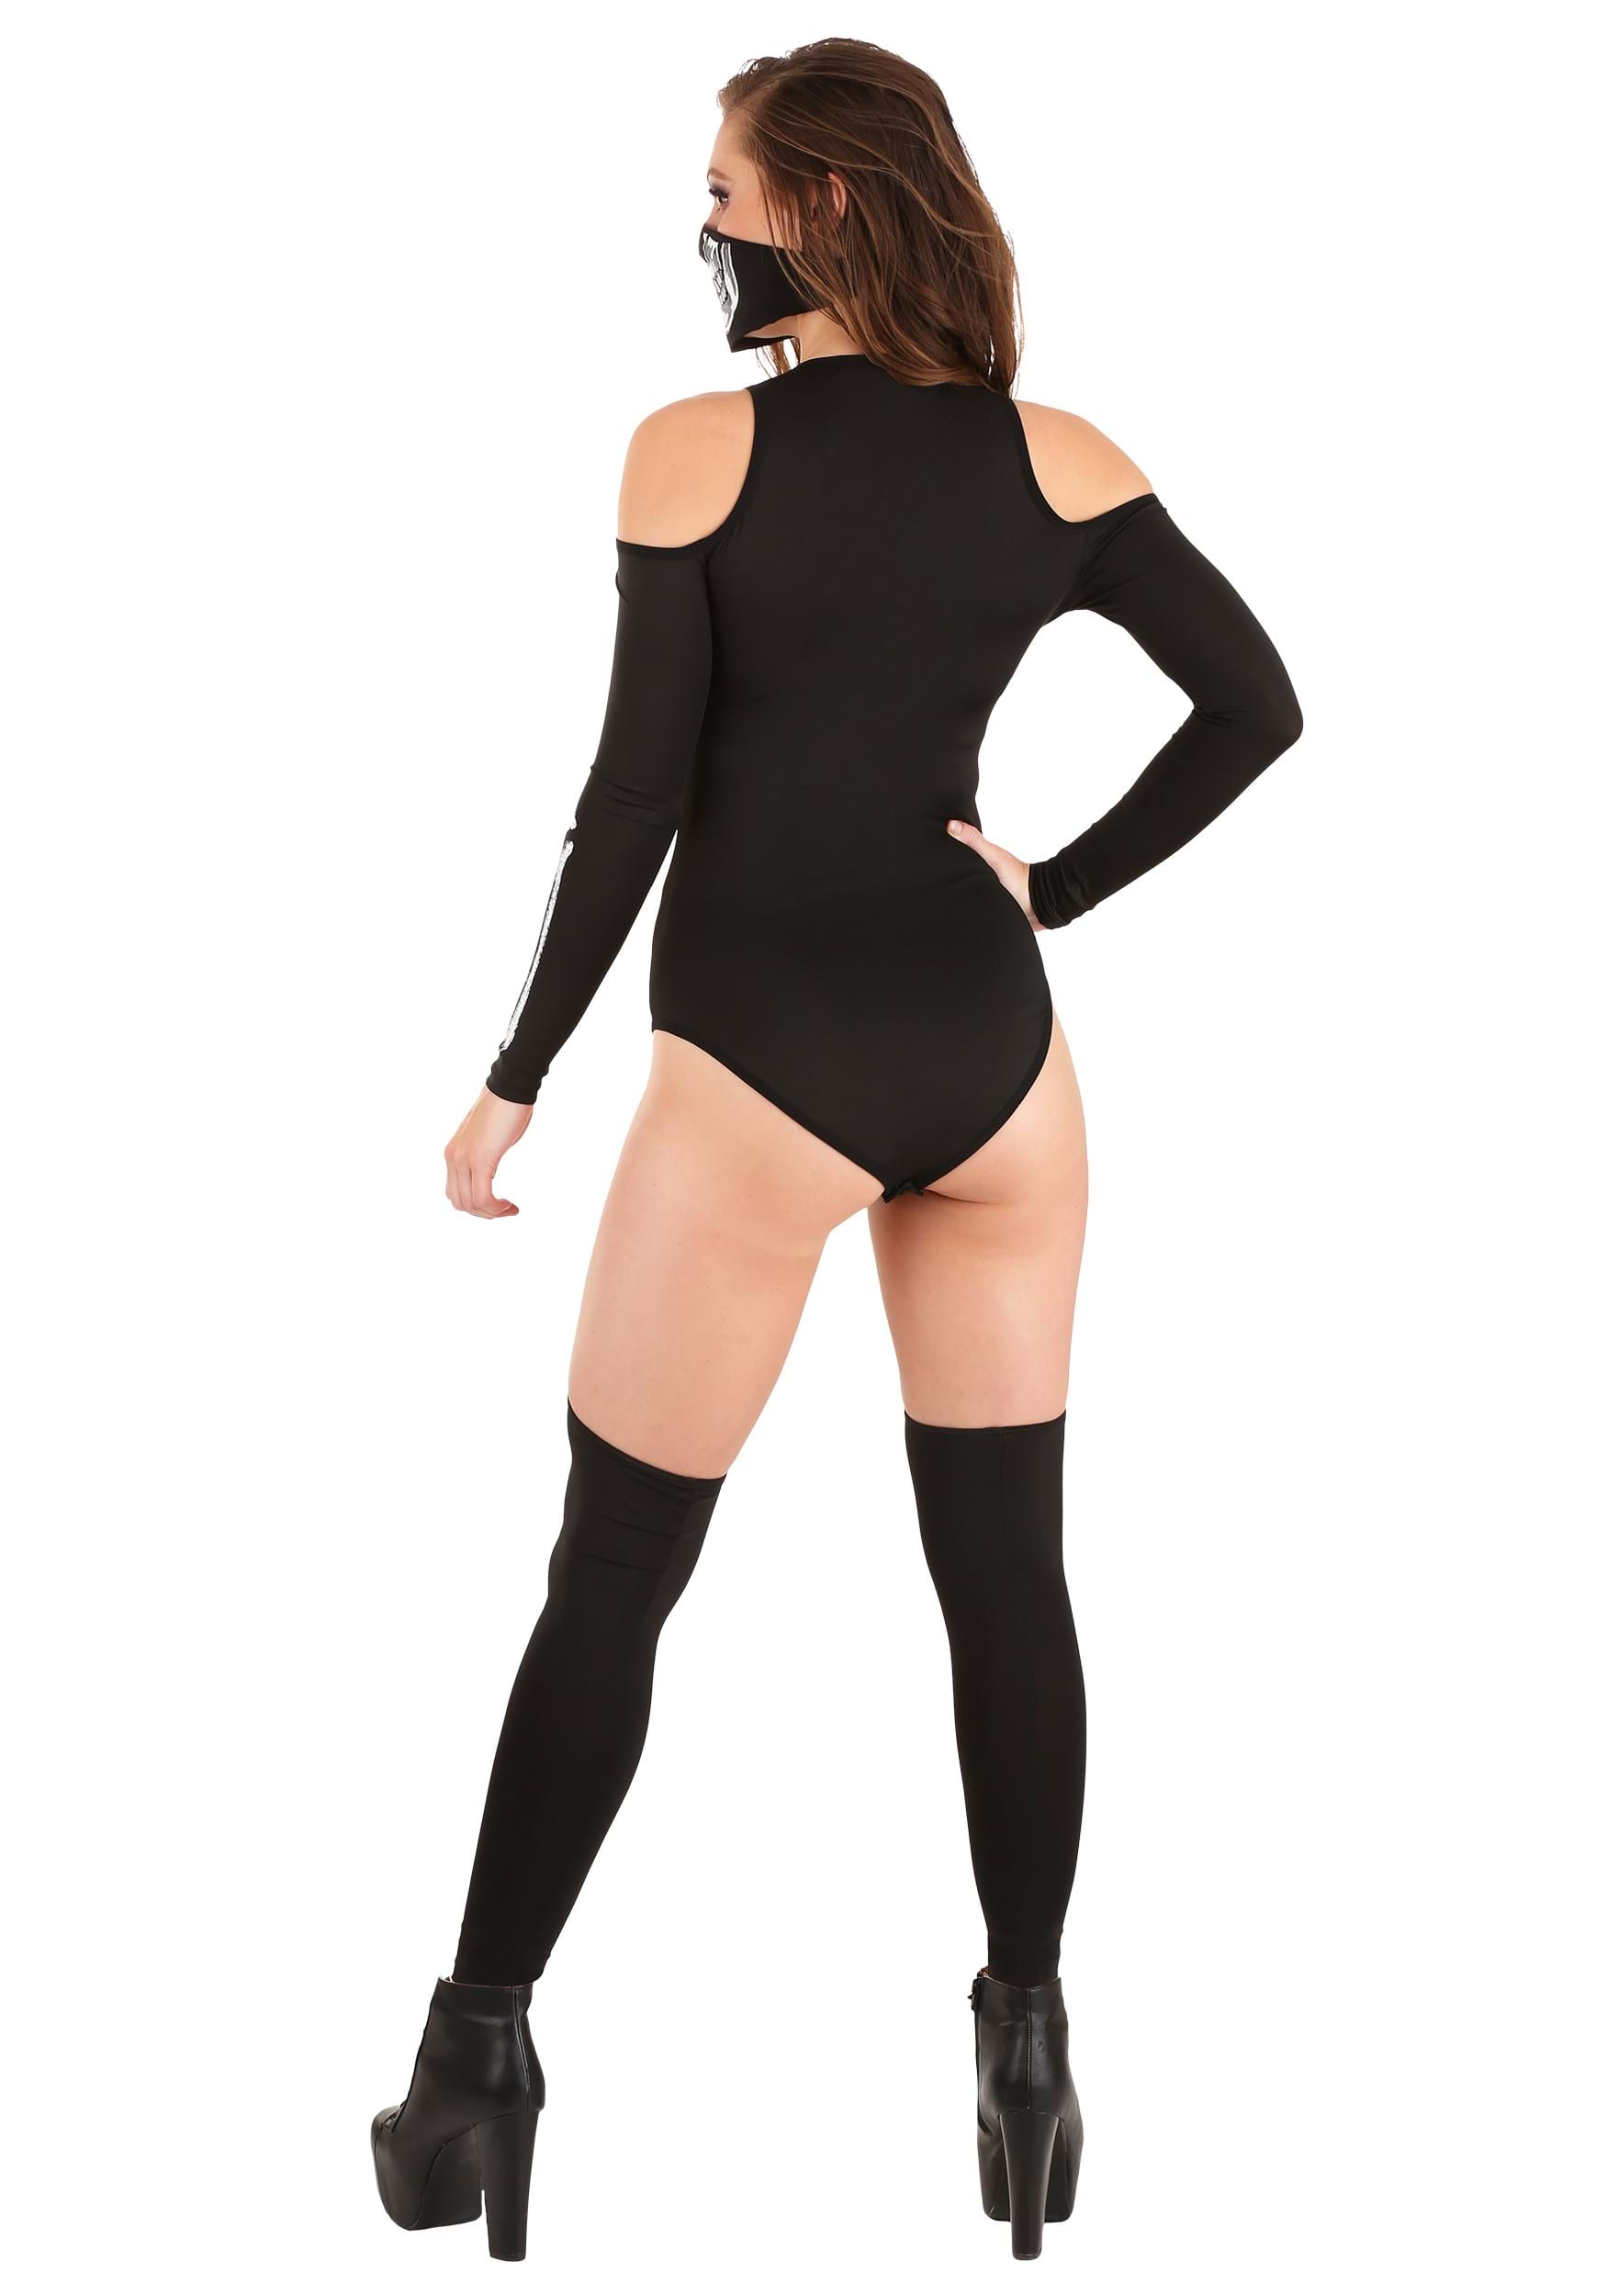 Halloween Costumes You Can Make With a Bodysuit